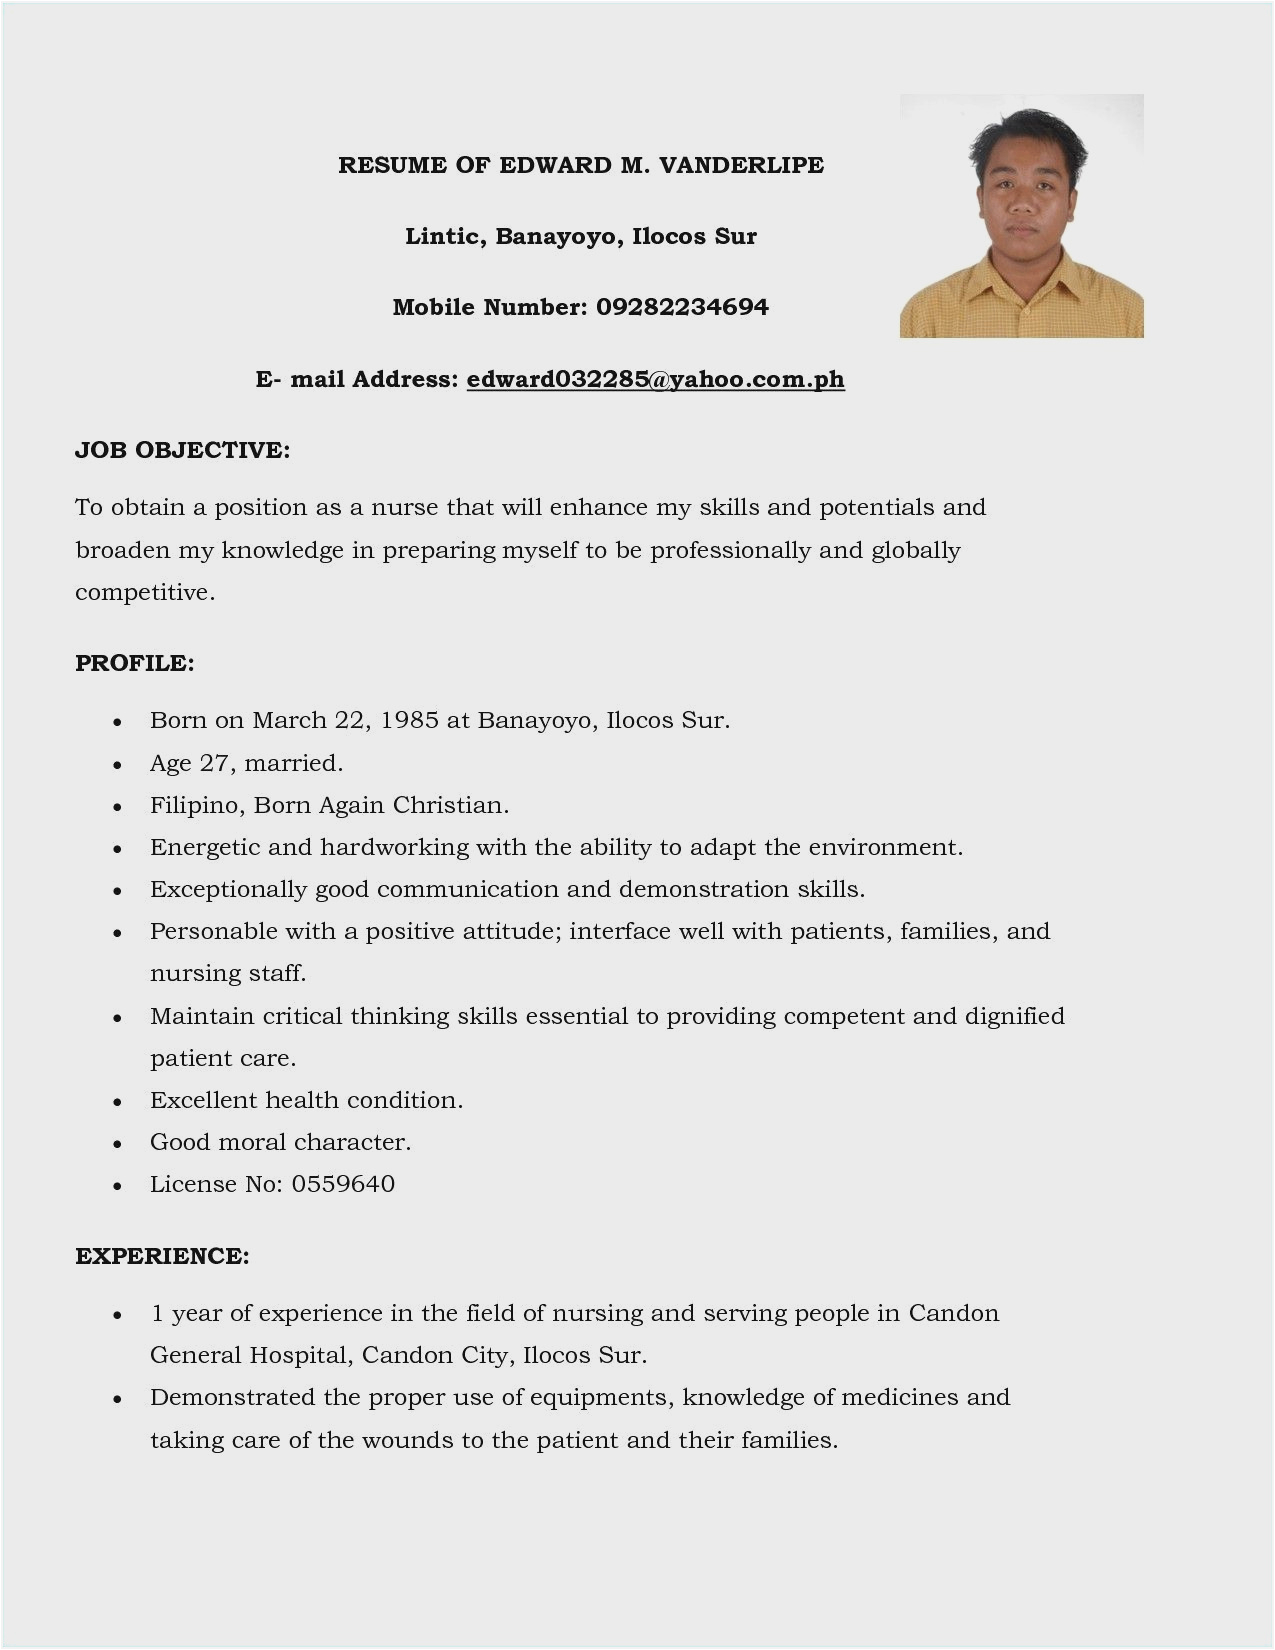 Sample Resume for Nurses with Experience In the Philippines Resume with Picture Philippines